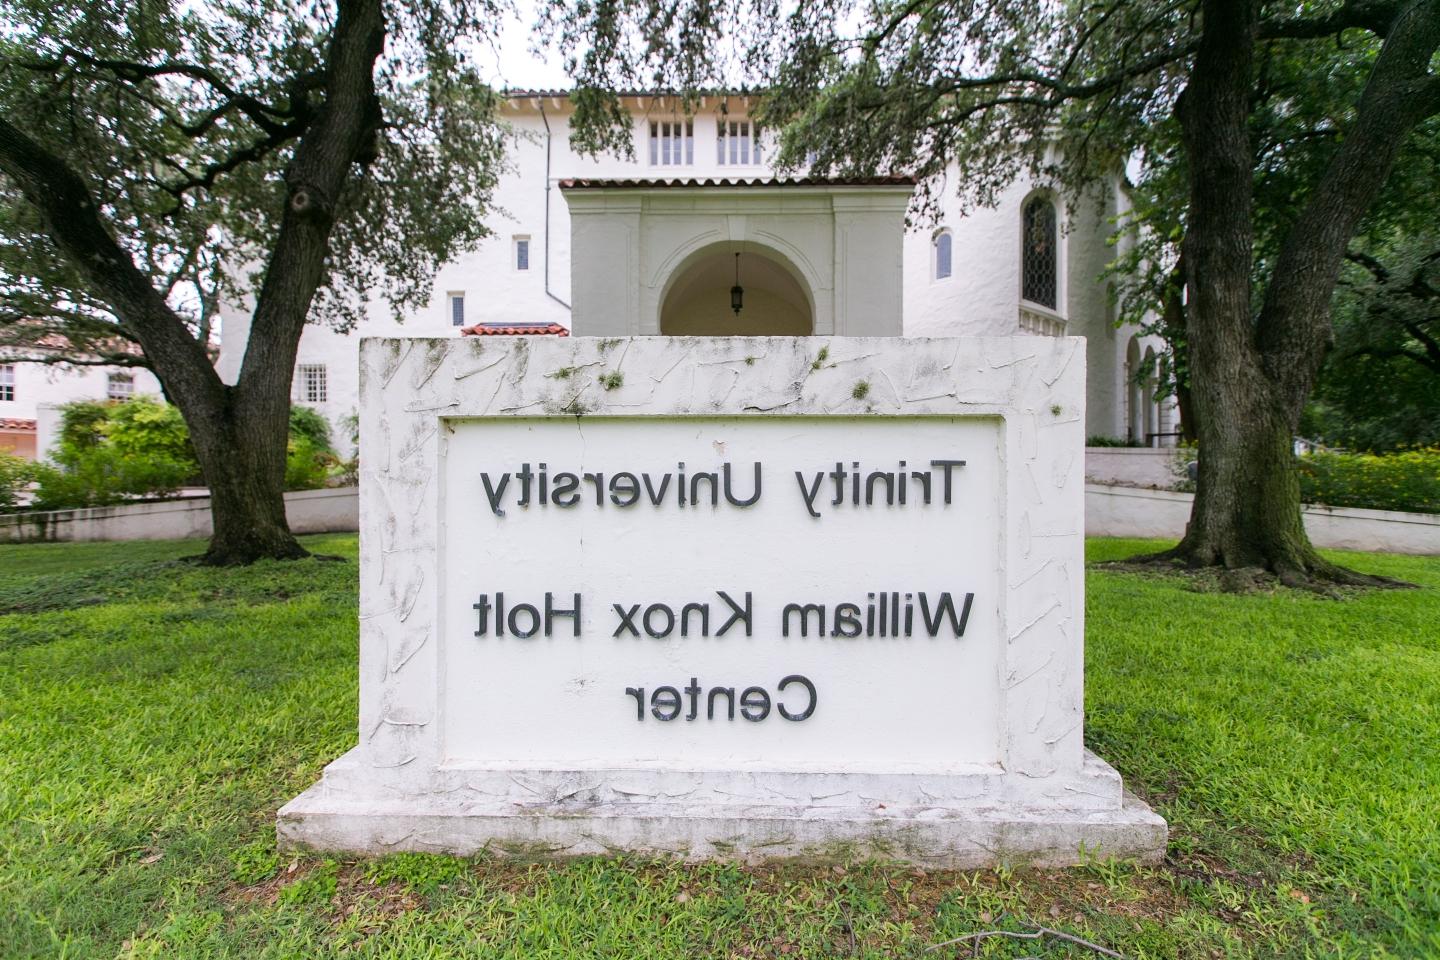 Large marble sign reads "Trinity University William Knox Holt Center"